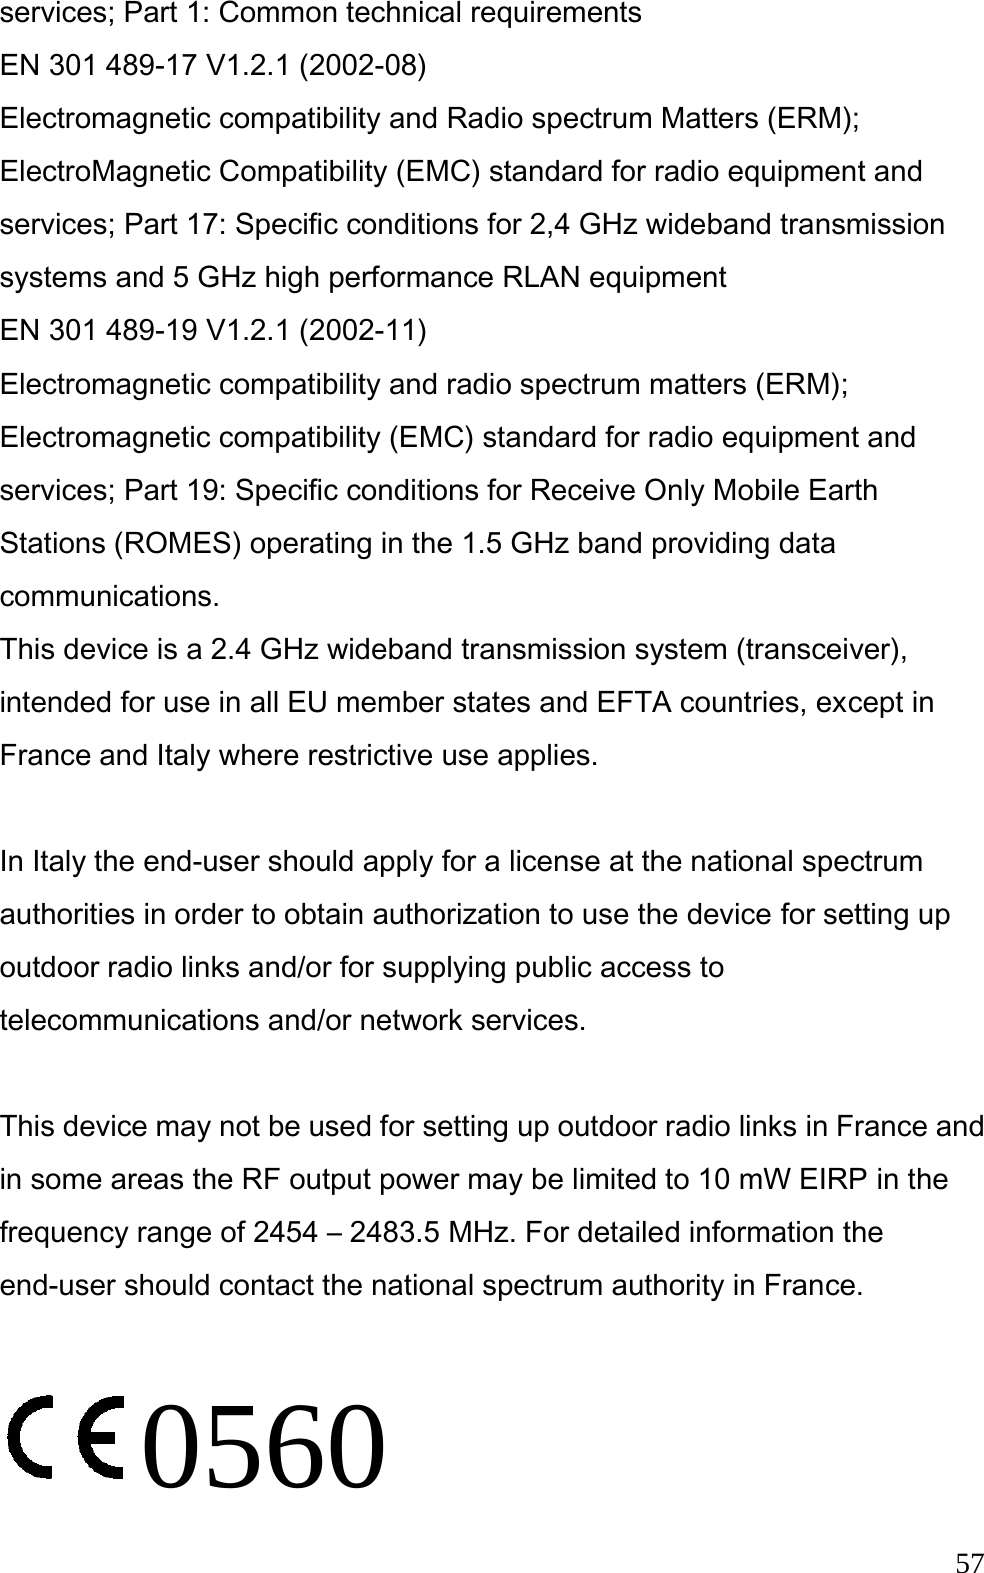  57services; Part 1: Common technical requirements EN 301 489-17 V1.2.1 (2002-08)   Electromagnetic compatibility and Radio spectrum Matters (ERM); ElectroMagnetic Compatibility (EMC) standard for radio equipment and services; Part 17: Specific conditions for 2,4 GHz wideband transmission systems and 5 GHz high performance RLAN equipment EN 301 489-19 V1.2.1 (2002-11) Electromagnetic compatibility and radio spectrum matters (ERM); Electromagnetic compatibility (EMC) standard for radio equipment and services; Part 19: Specific conditions for Receive Only Mobile Earth Stations (ROMES) operating in the 1.5 GHz band providing data communications. This device is a 2.4 GHz wideband transmission system (transceiver), intended for use in all EU member states and EFTA countries, except in France and Italy where restrictive use applies.  In Italy the end-user should apply for a license at the national spectrum authorities in order to obtain authorization to use the device for setting up outdoor radio links and/or for supplying public access to telecommunications and/or network services.  This device may not be used for setting up outdoor radio links in France and in some areas the RF output power may be limited to 10 mW EIRP in the frequency range of 2454 – 2483.5 MHz. For detailed information the end-user should contact the national spectrum authority in France.  0560 